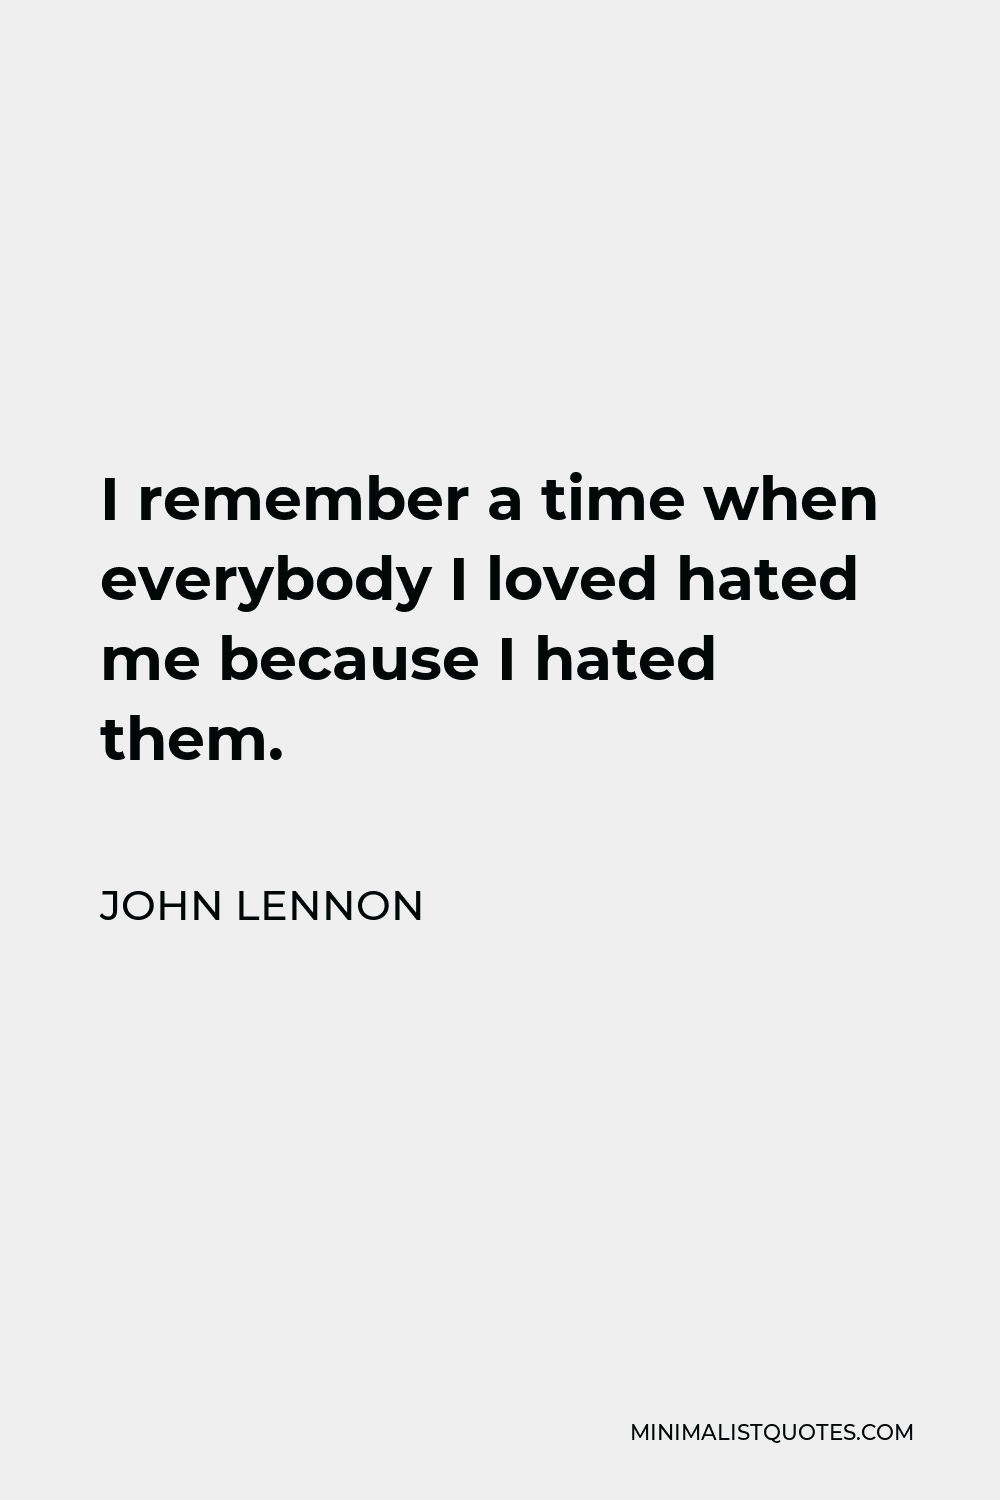 John Lennon Quote - I remember a time when everybody I loved hated me because I hated them.